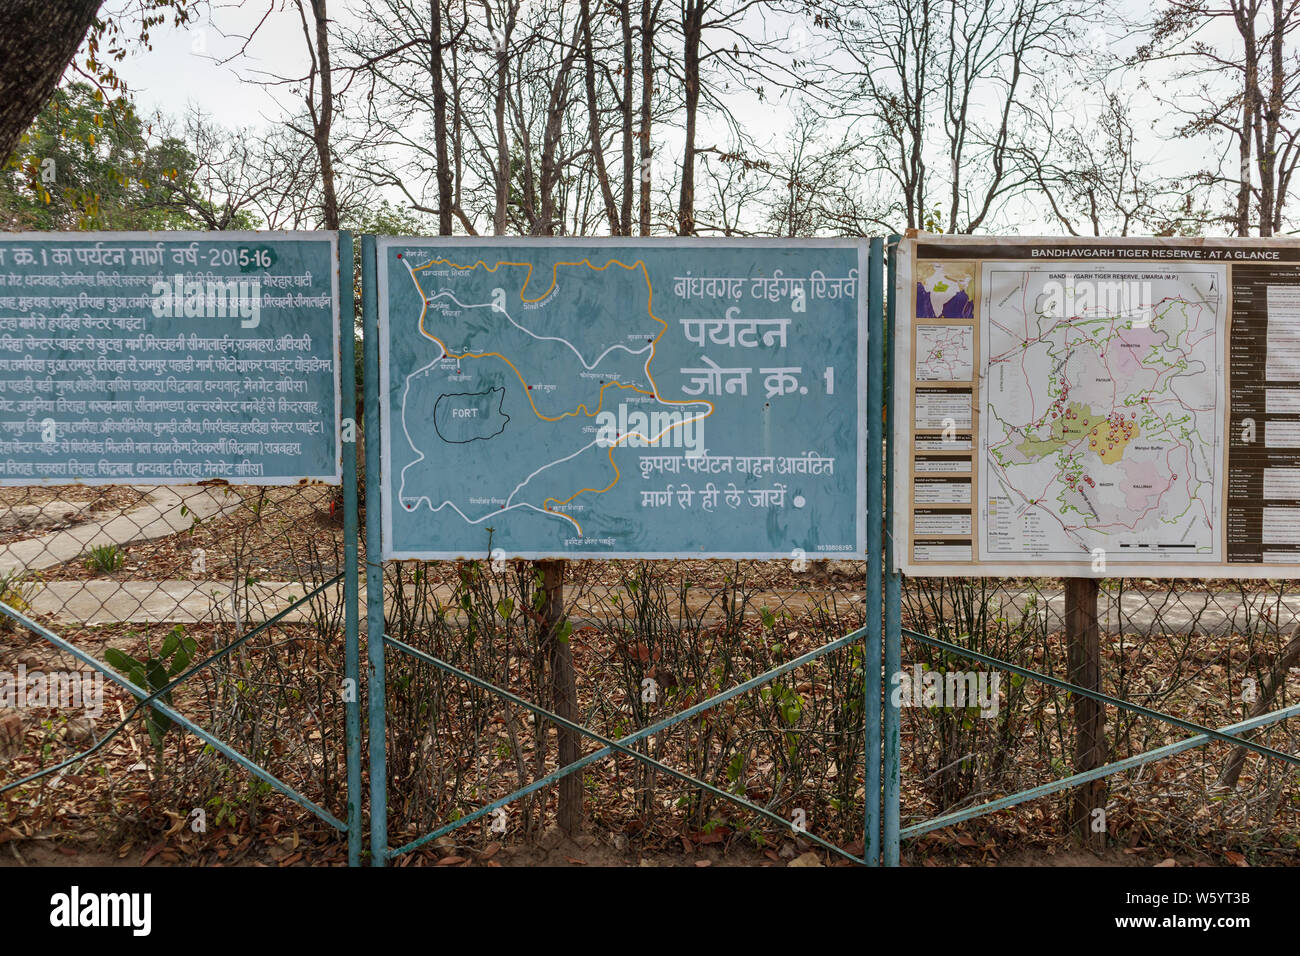 Signs at the Tala Gate entrance to Bandhavgarh National Park with maps of the Tiger Reserve, Umaria district, central Indian state of Madhya Pradesh Stock Photo